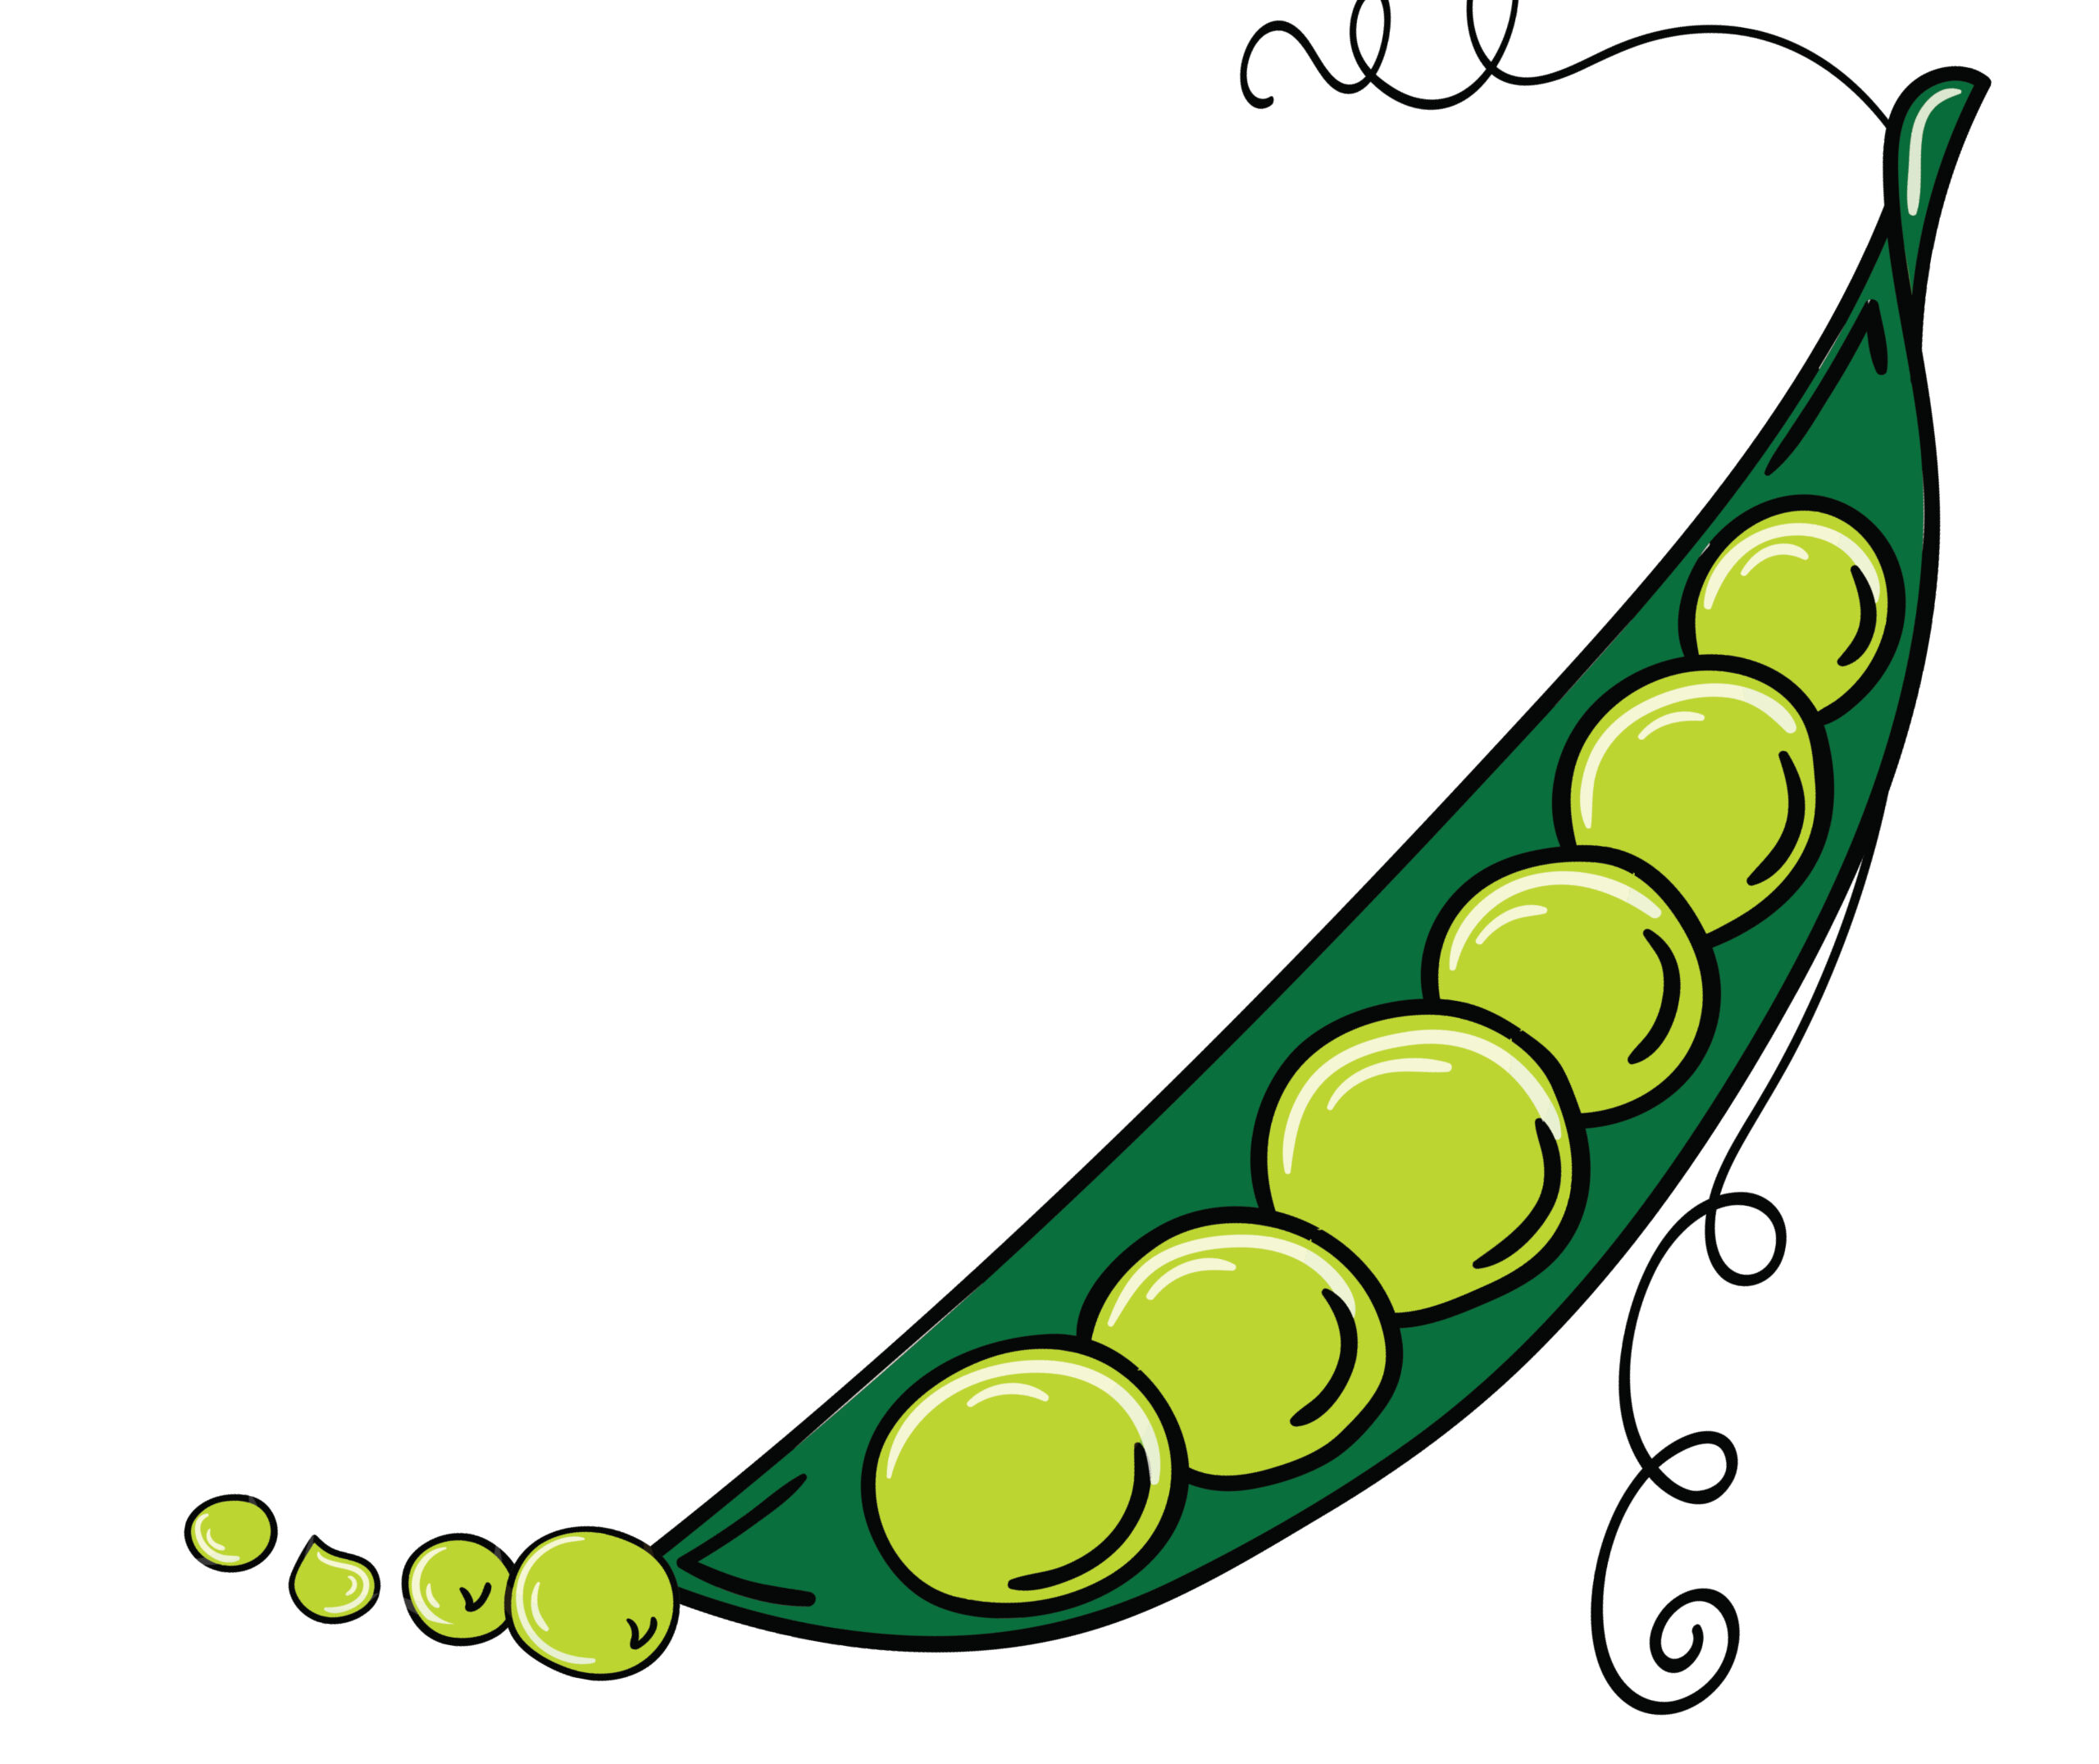 Illustration of peas in a pod